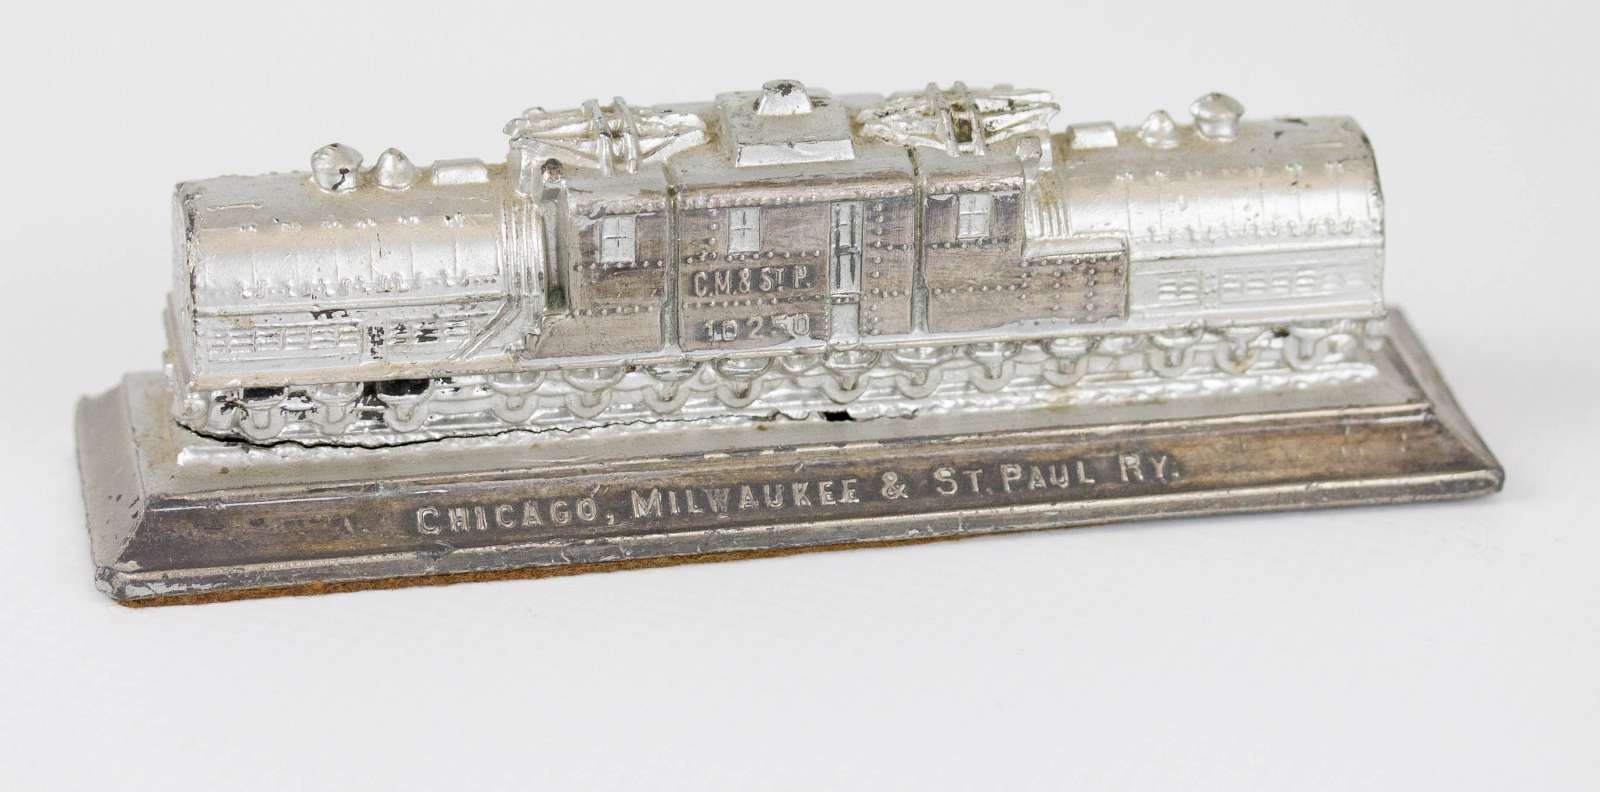 C.M. & St. P. RAILROAD ADVERTISING PAPERWEIGHT